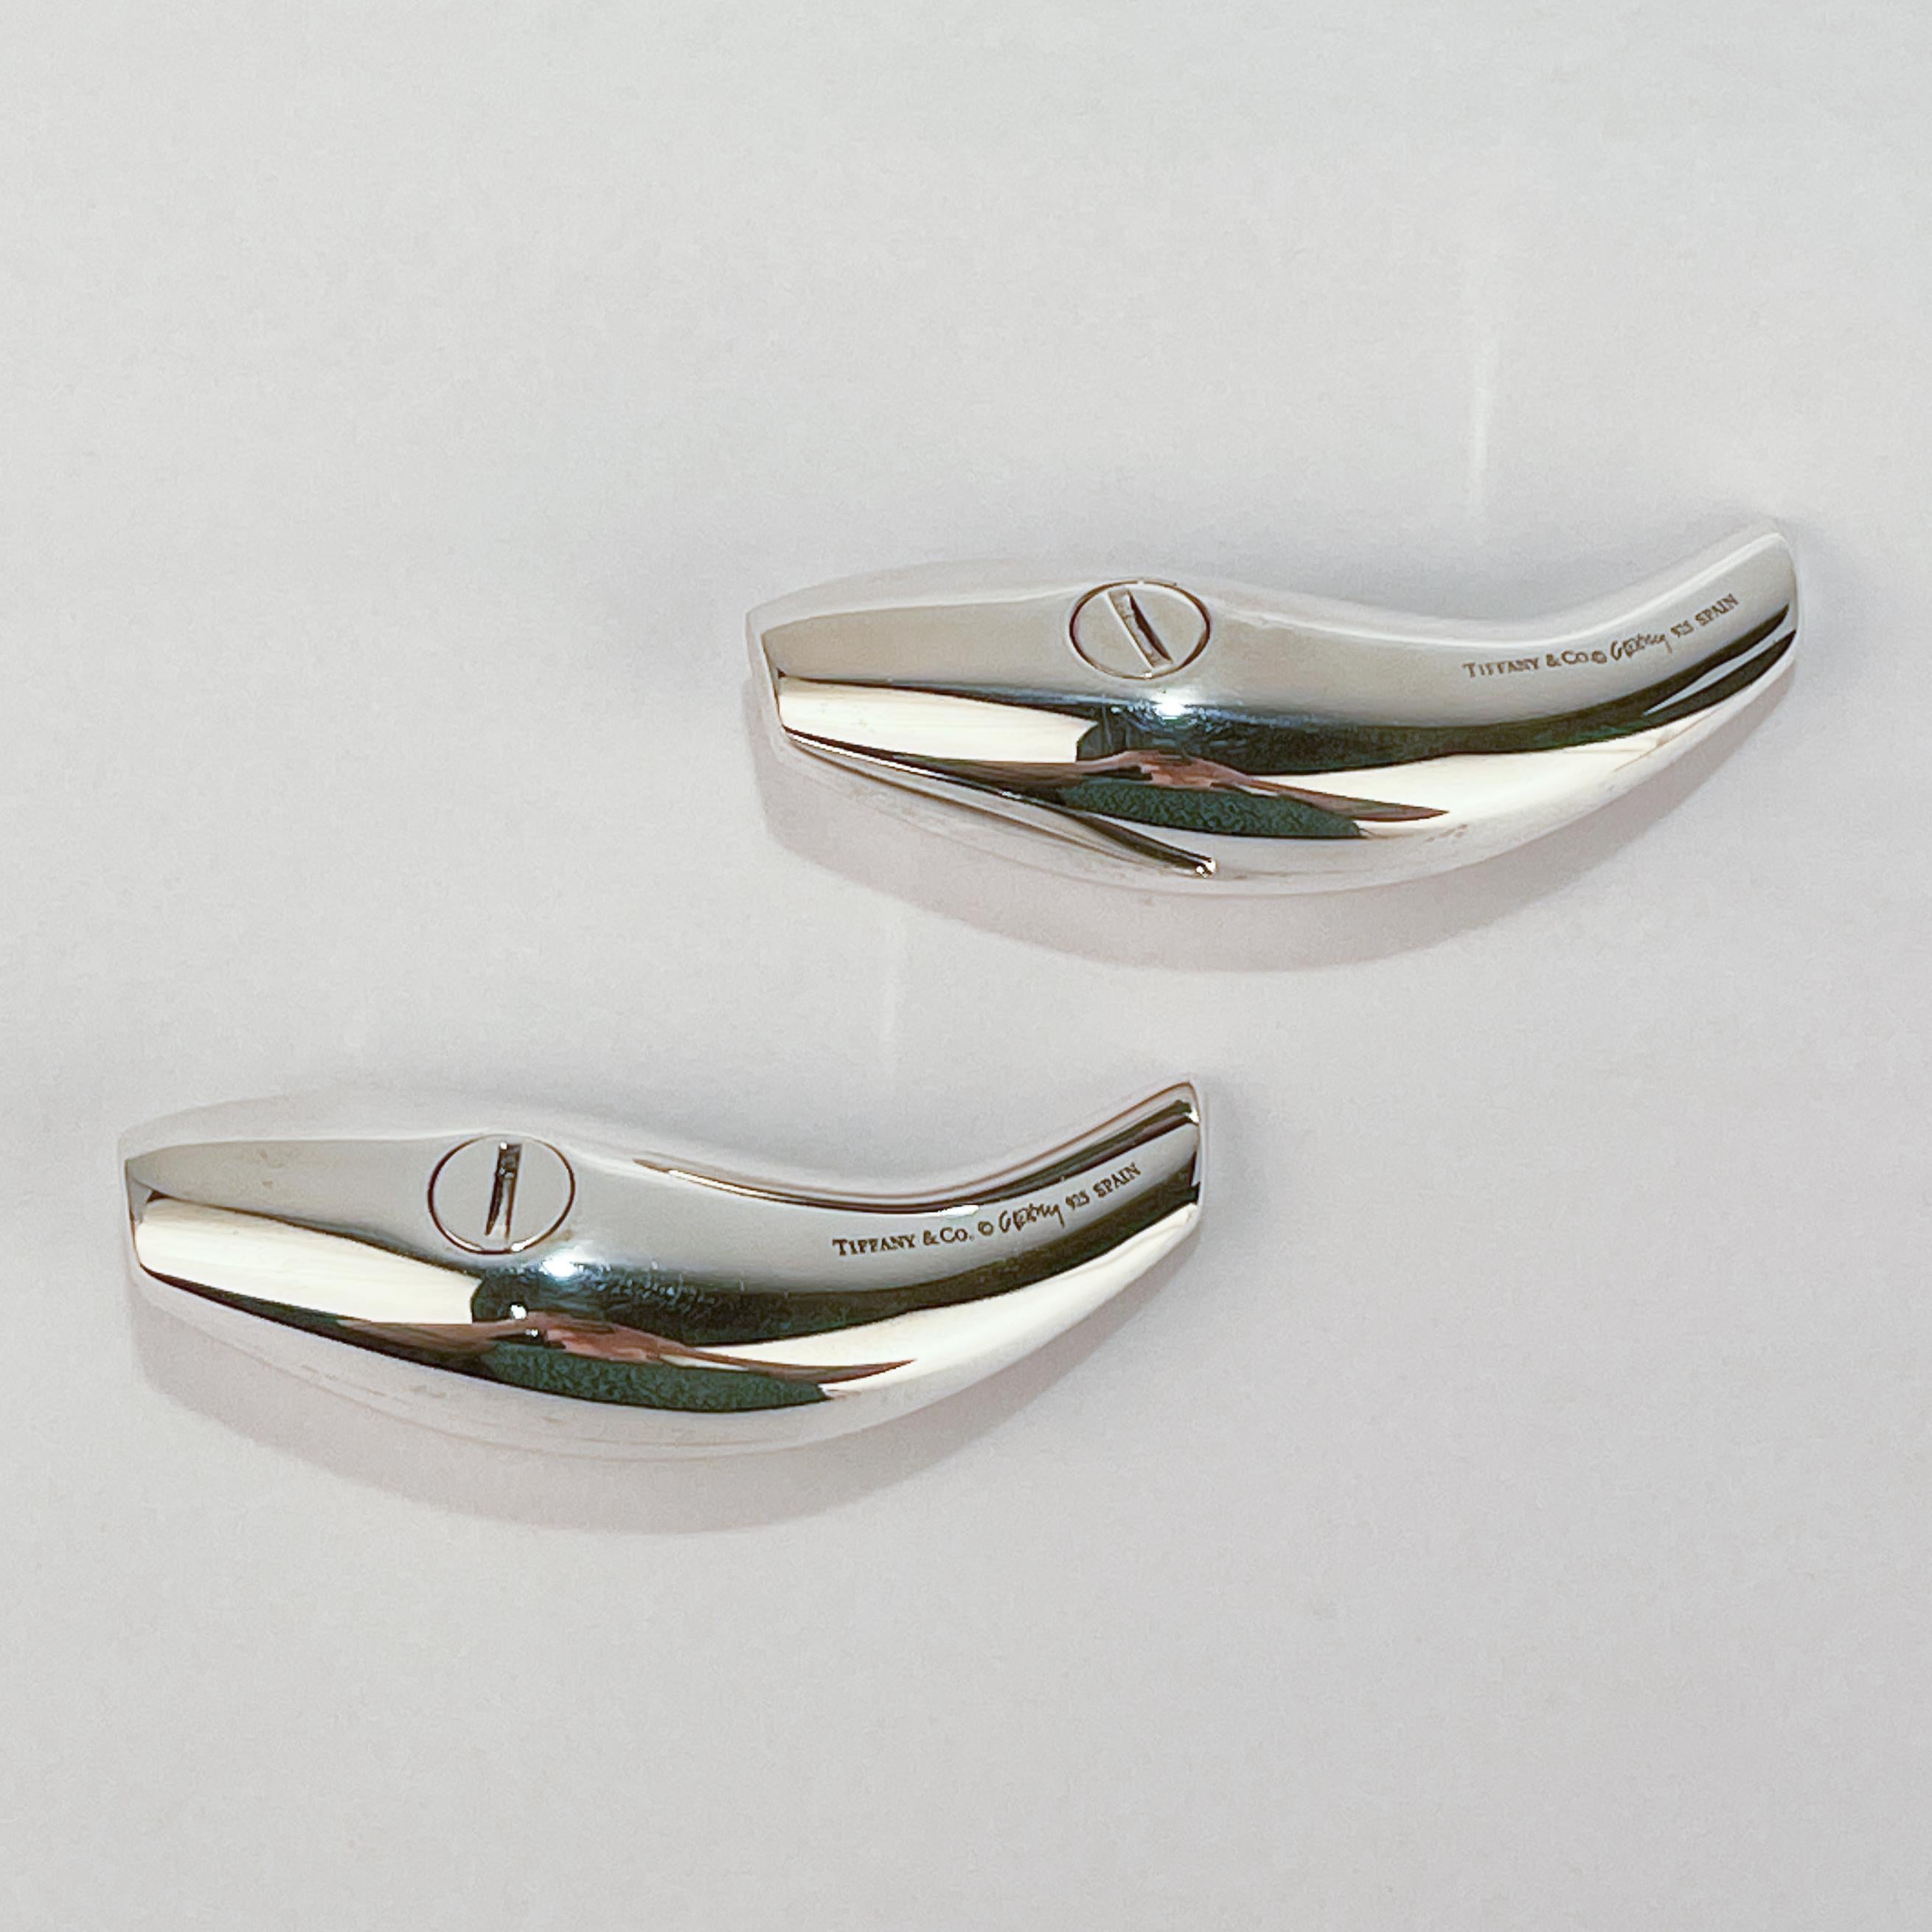 Tiffany & Co. Sterling Silver 'Fish' Salt & Pepper Shakers by Frank Gehry 1